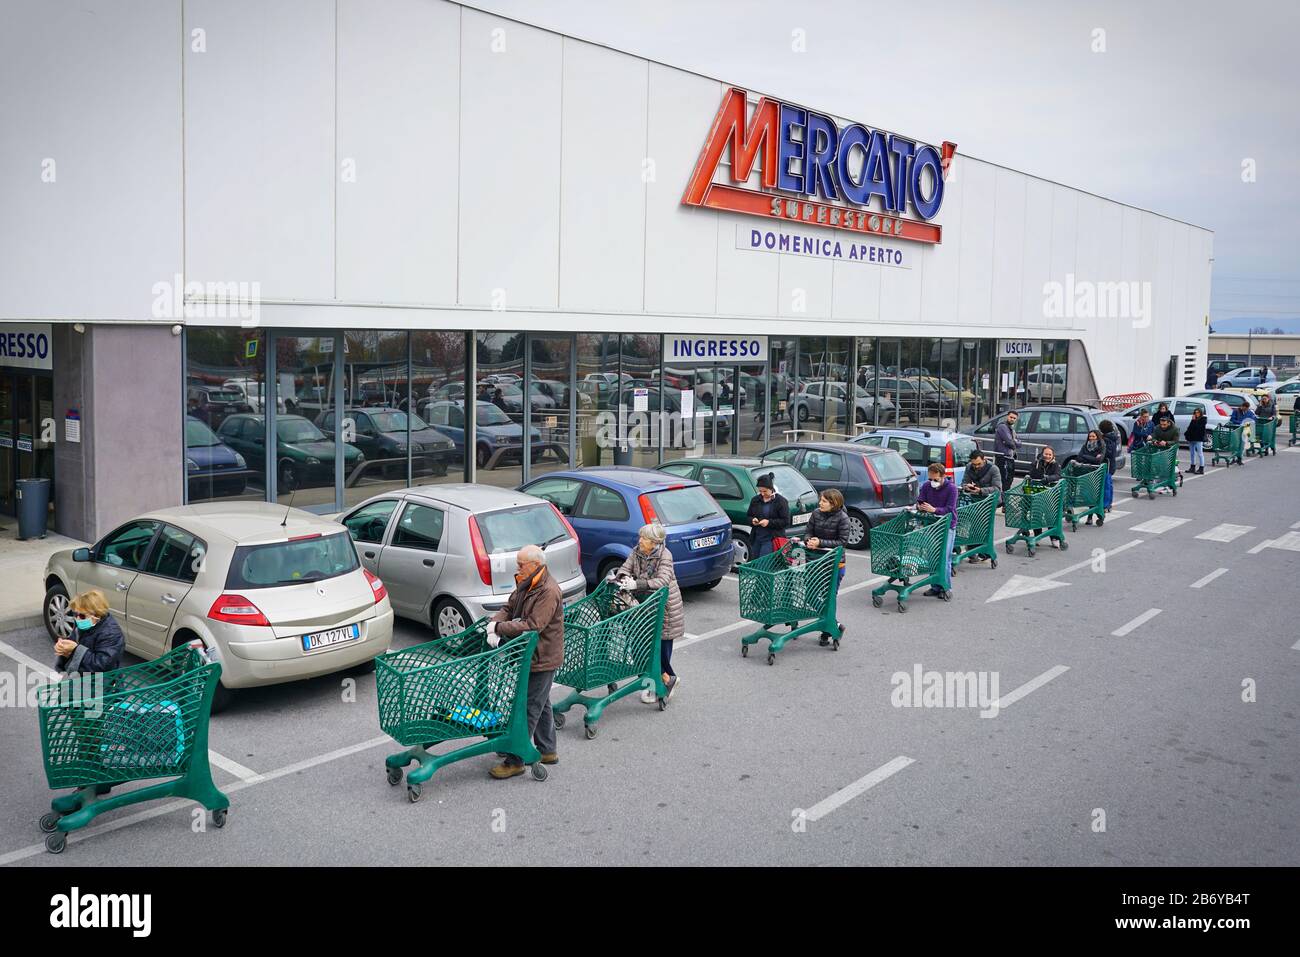 Coronavirus pandemic effects: long queue to enter the supermarket for grocery shopping. Milan, Italy - March 2020 Stock Photo